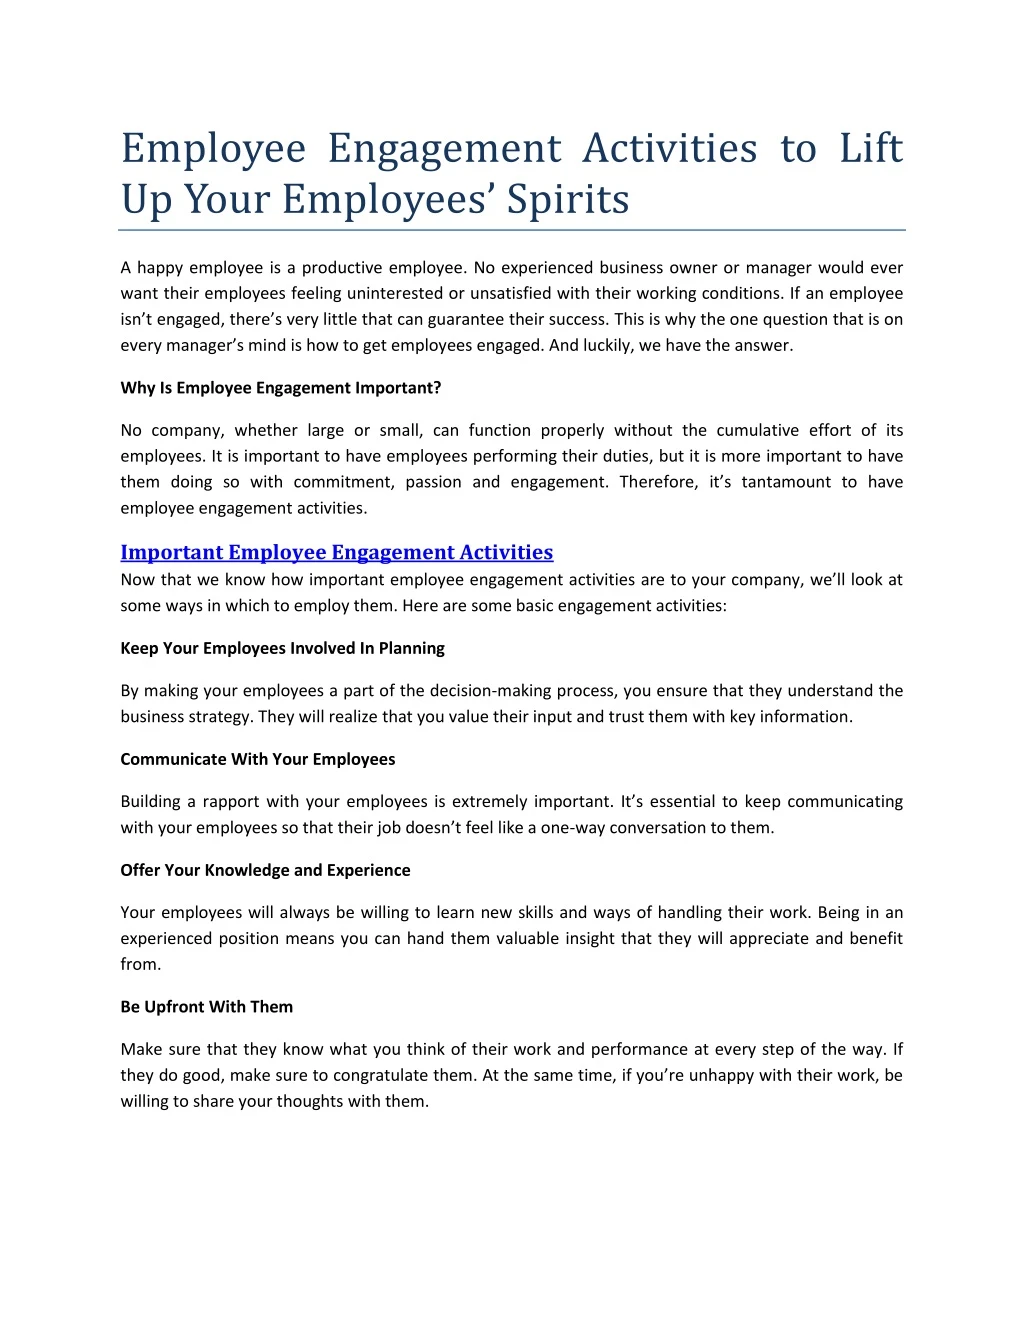 employee engagement activities to lift up your